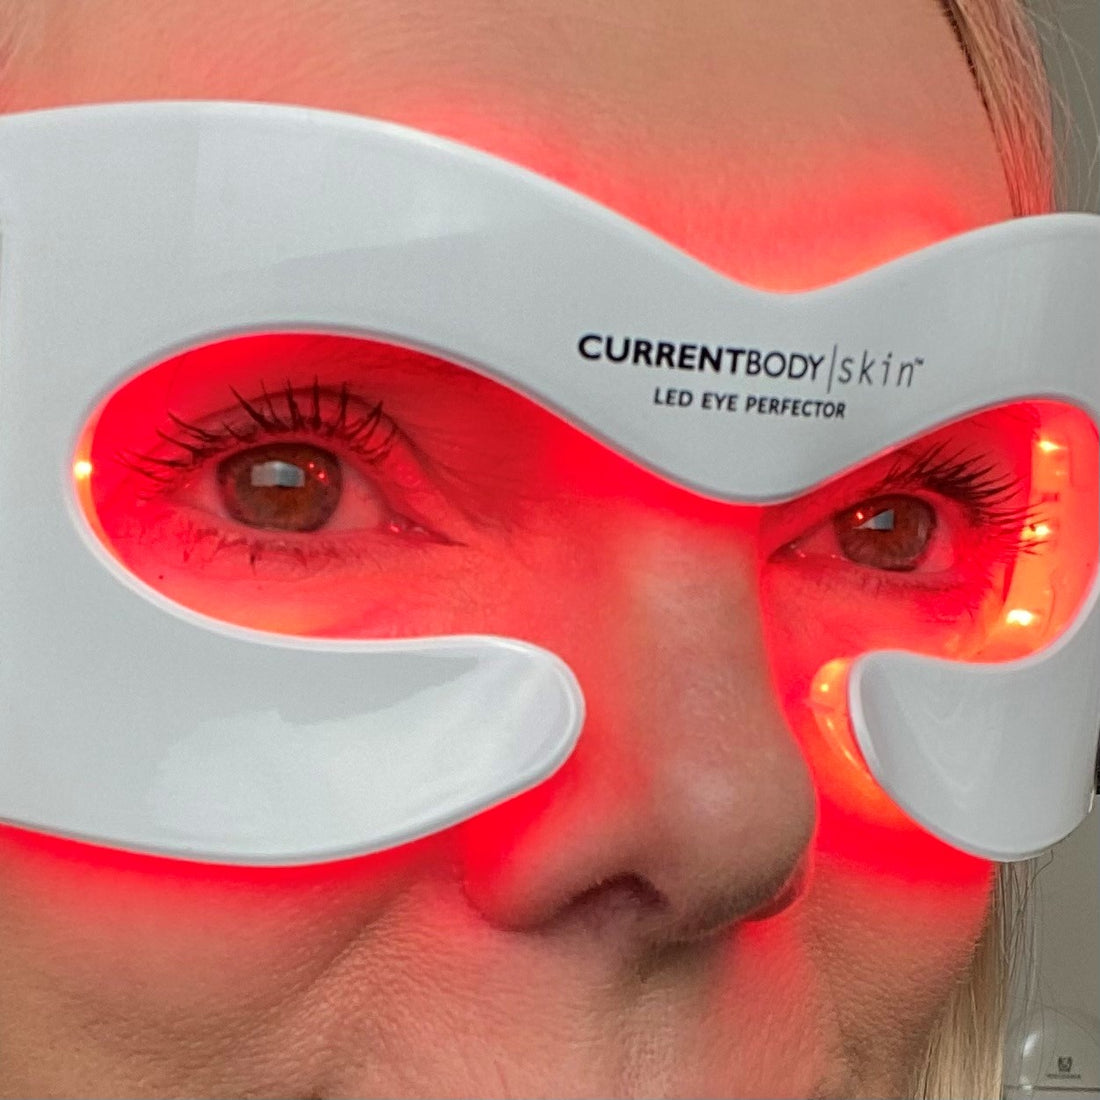 NEW Targeted LED Treatments from Currentbody SKIN